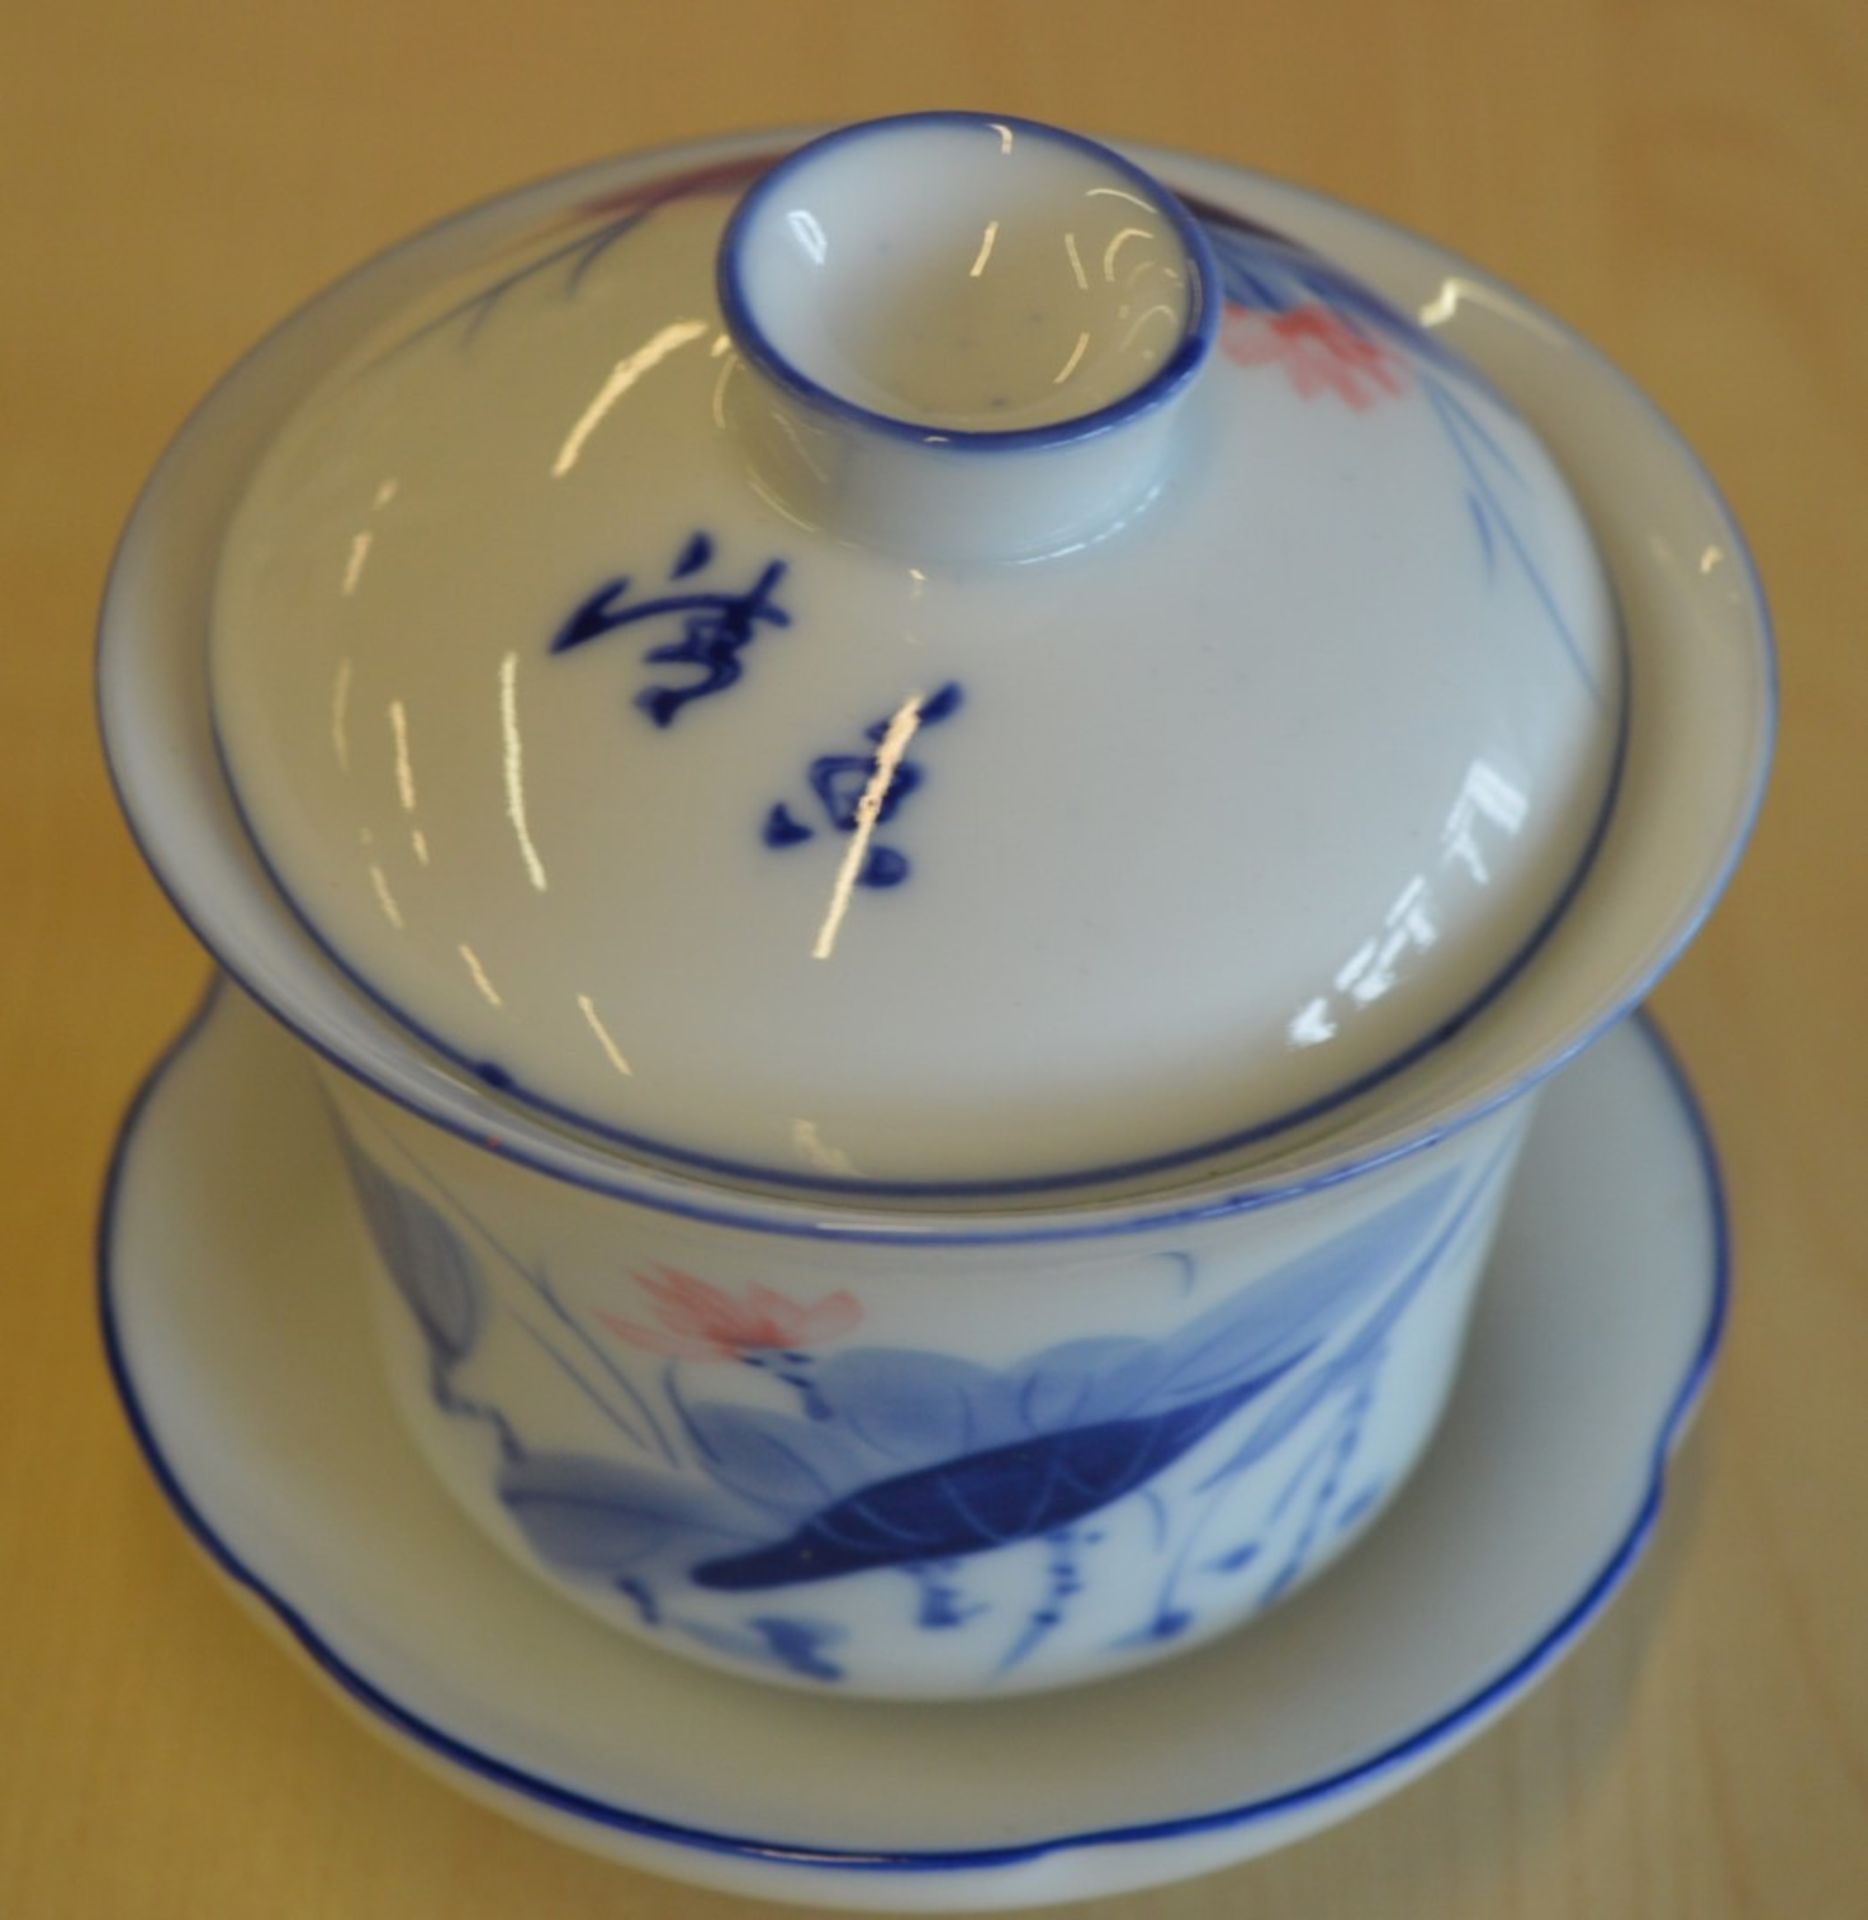 20 x Oriental Cups With Saucers and Lids - Elegant Porcelain Cups / Pots With Fitted Lid and - Image 5 of 6